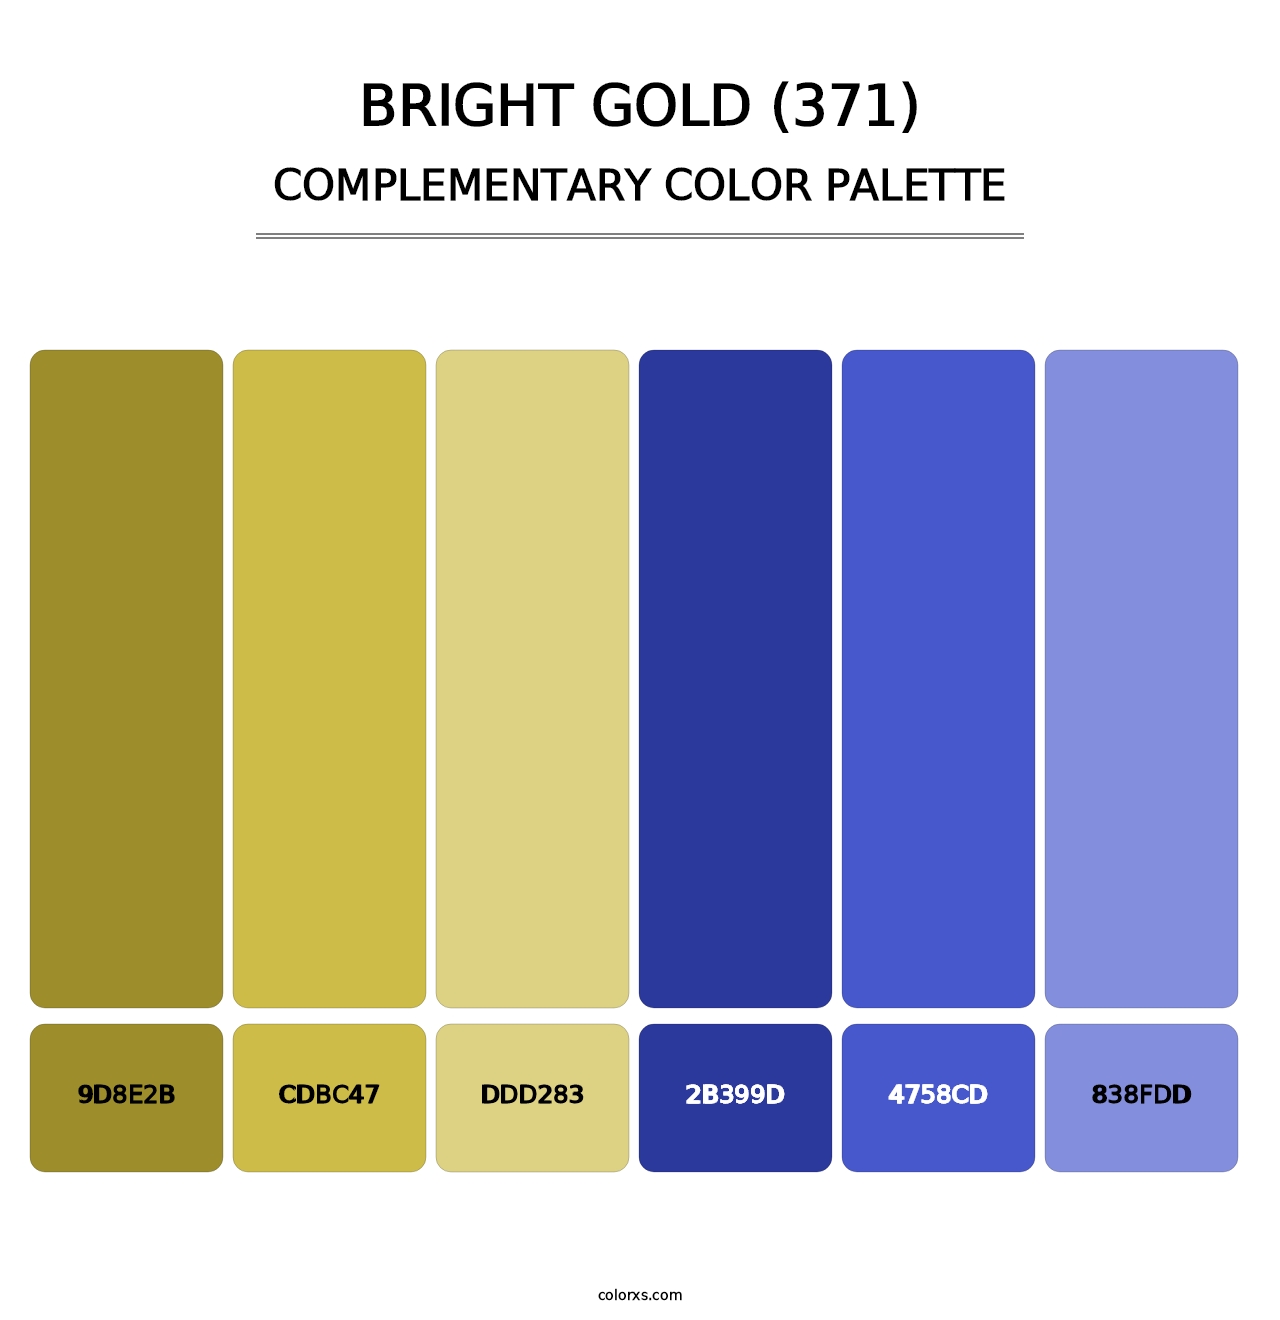 Bright Gold (371) - Complementary Color Palette